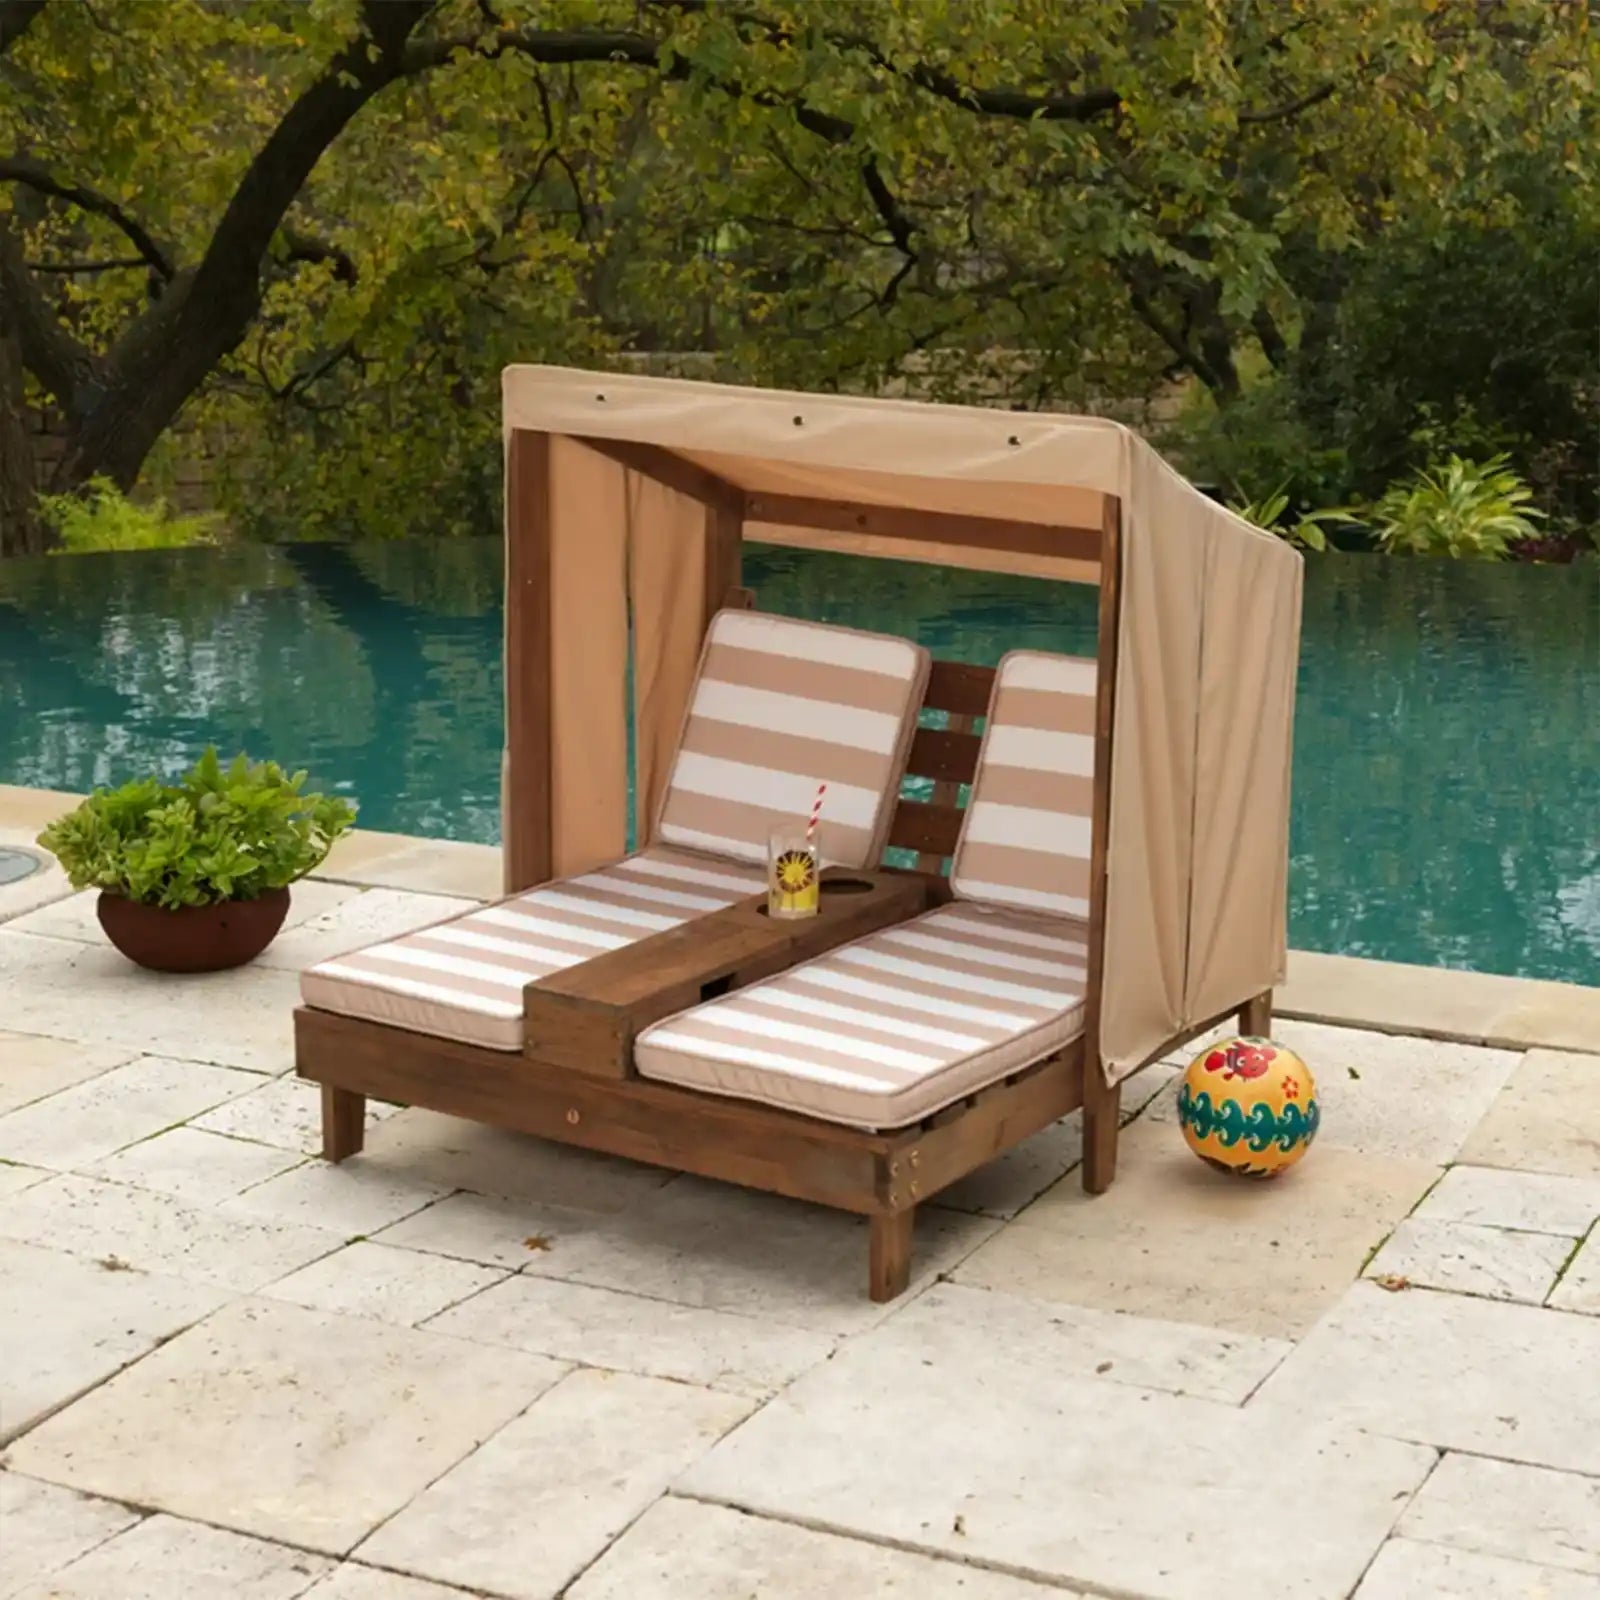 Wooden Outdoor Double Chaise Lounge for Kids, Cup Holders